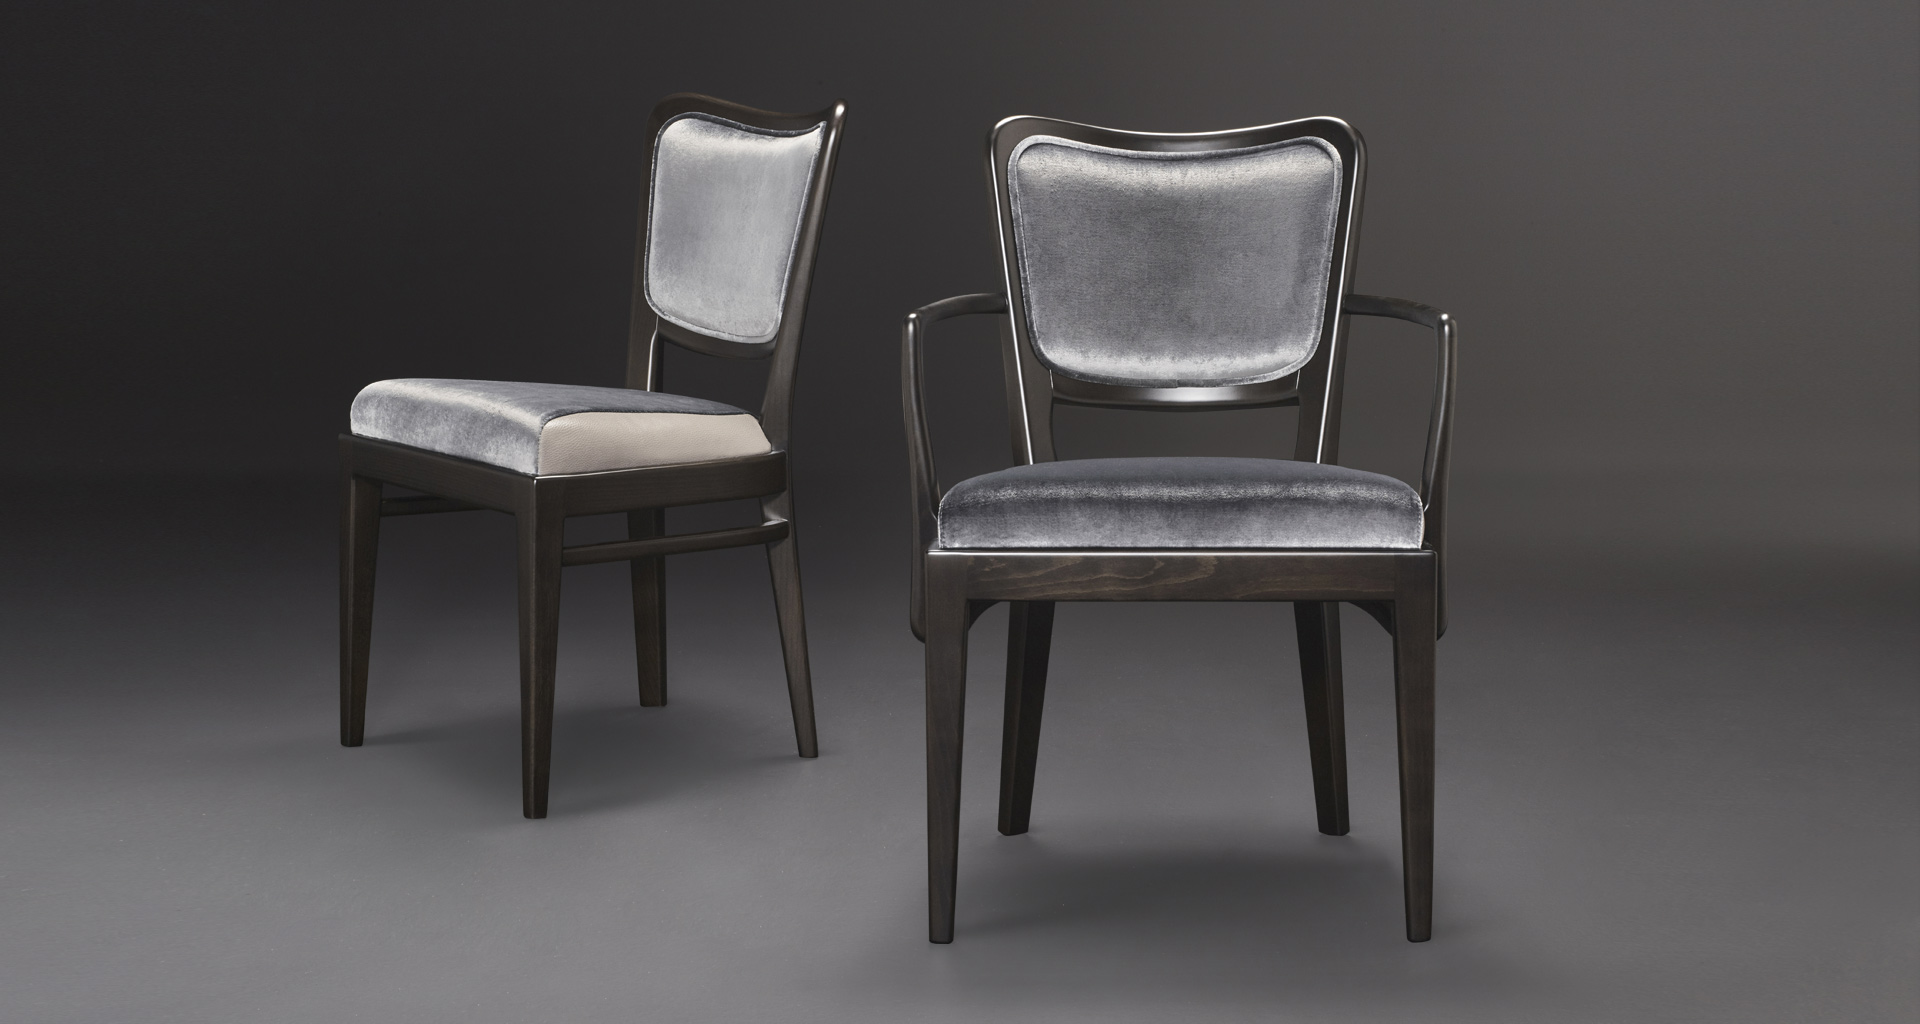 Pepita is a wooden dining chair with fabric or leather seat, from Promemoria's catalogue | Promemoria